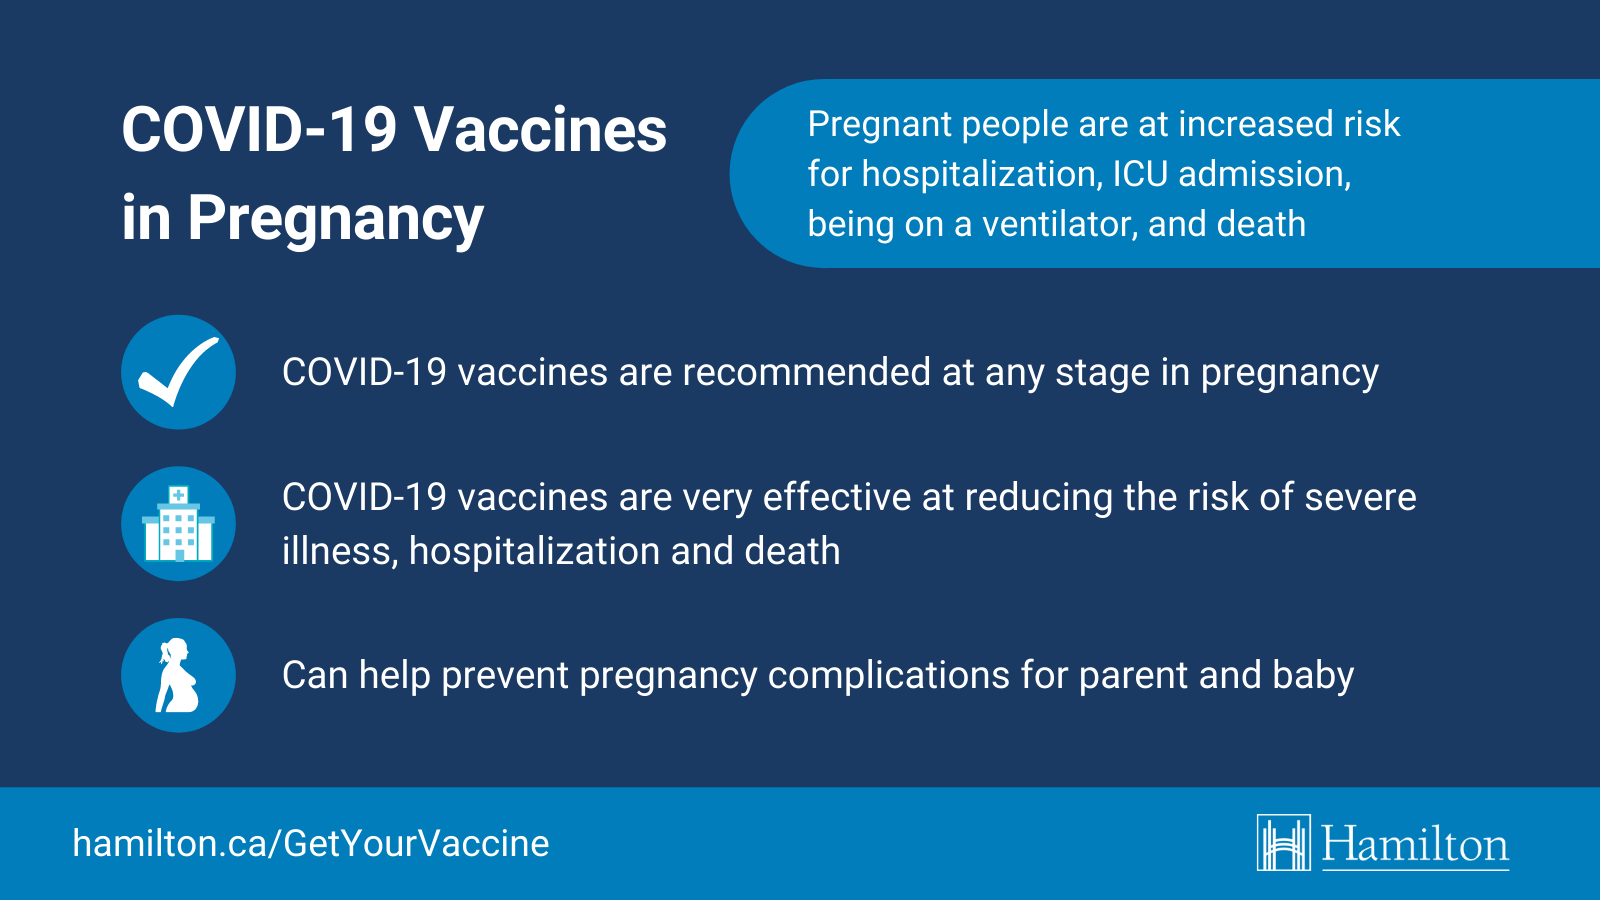 COVID-19 Vaccines in Pregnancy infographic